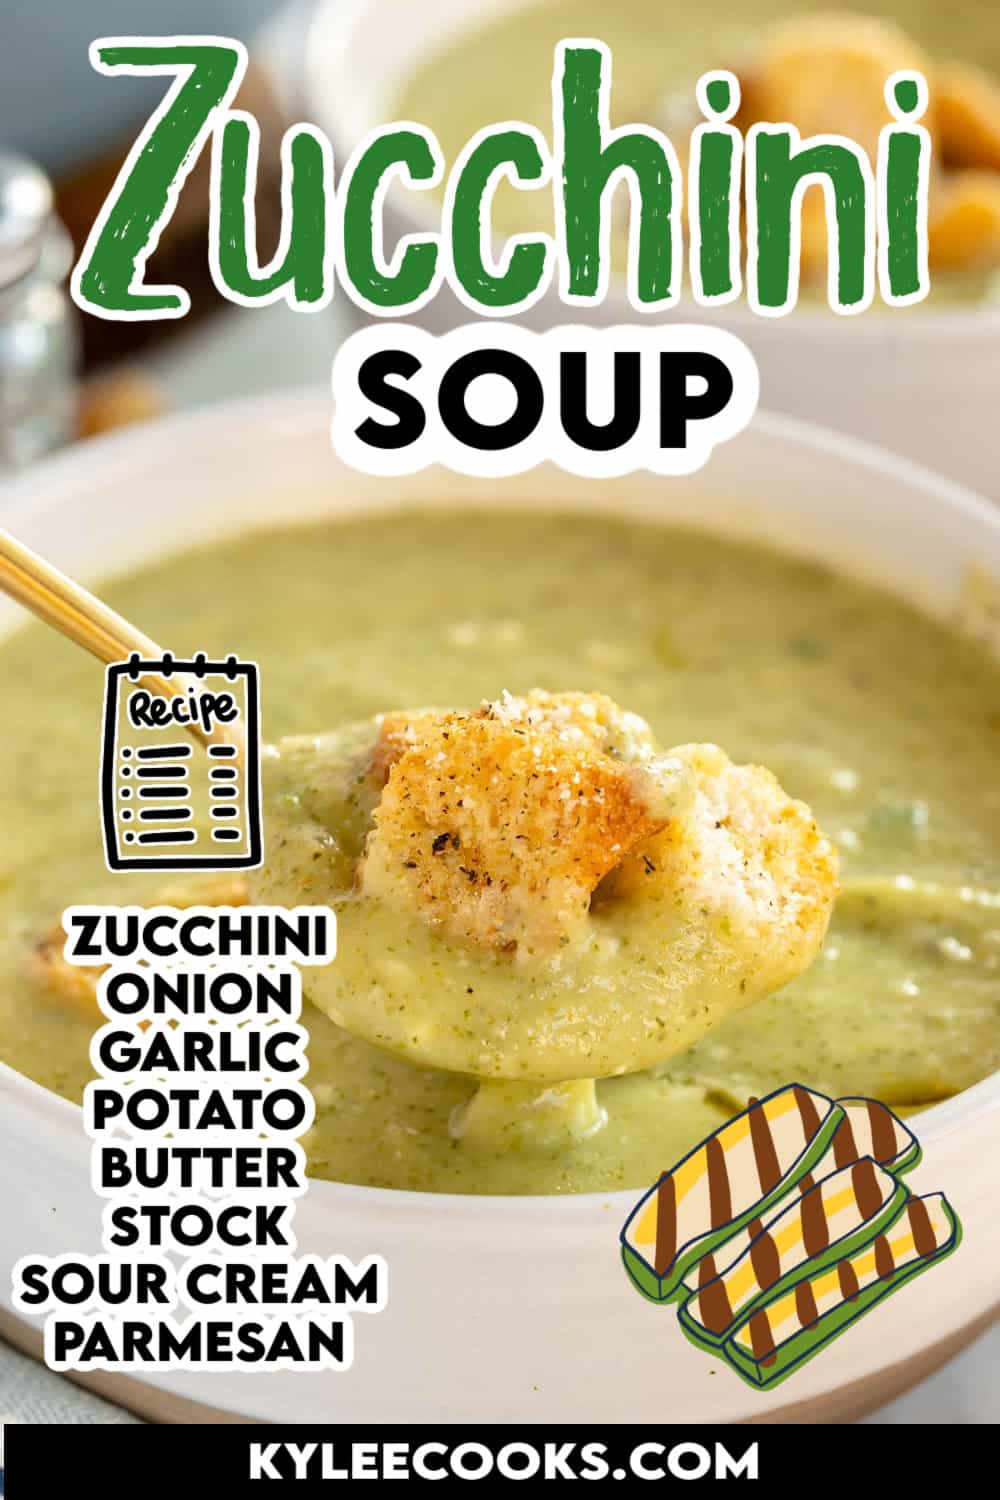 bowl of zucchini soup with "zucchini soup" and all the ingredients listed in a text overlay.